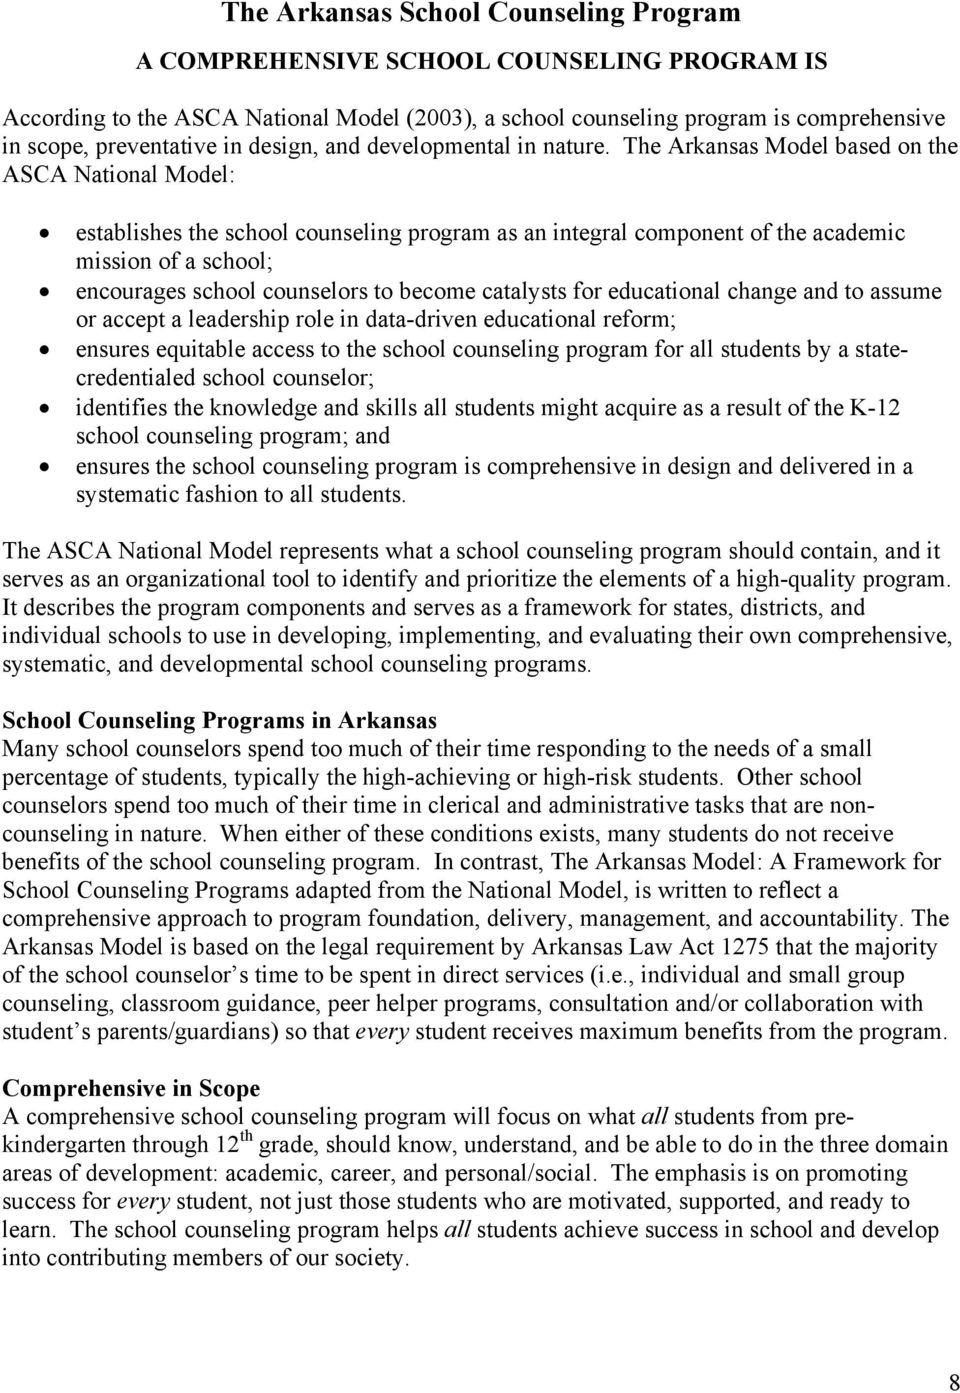 The Arkansas Model based on the ASCA National Model: establishes the school counseling program as an integral component of the academic mission of a school; encourages school counselors to become